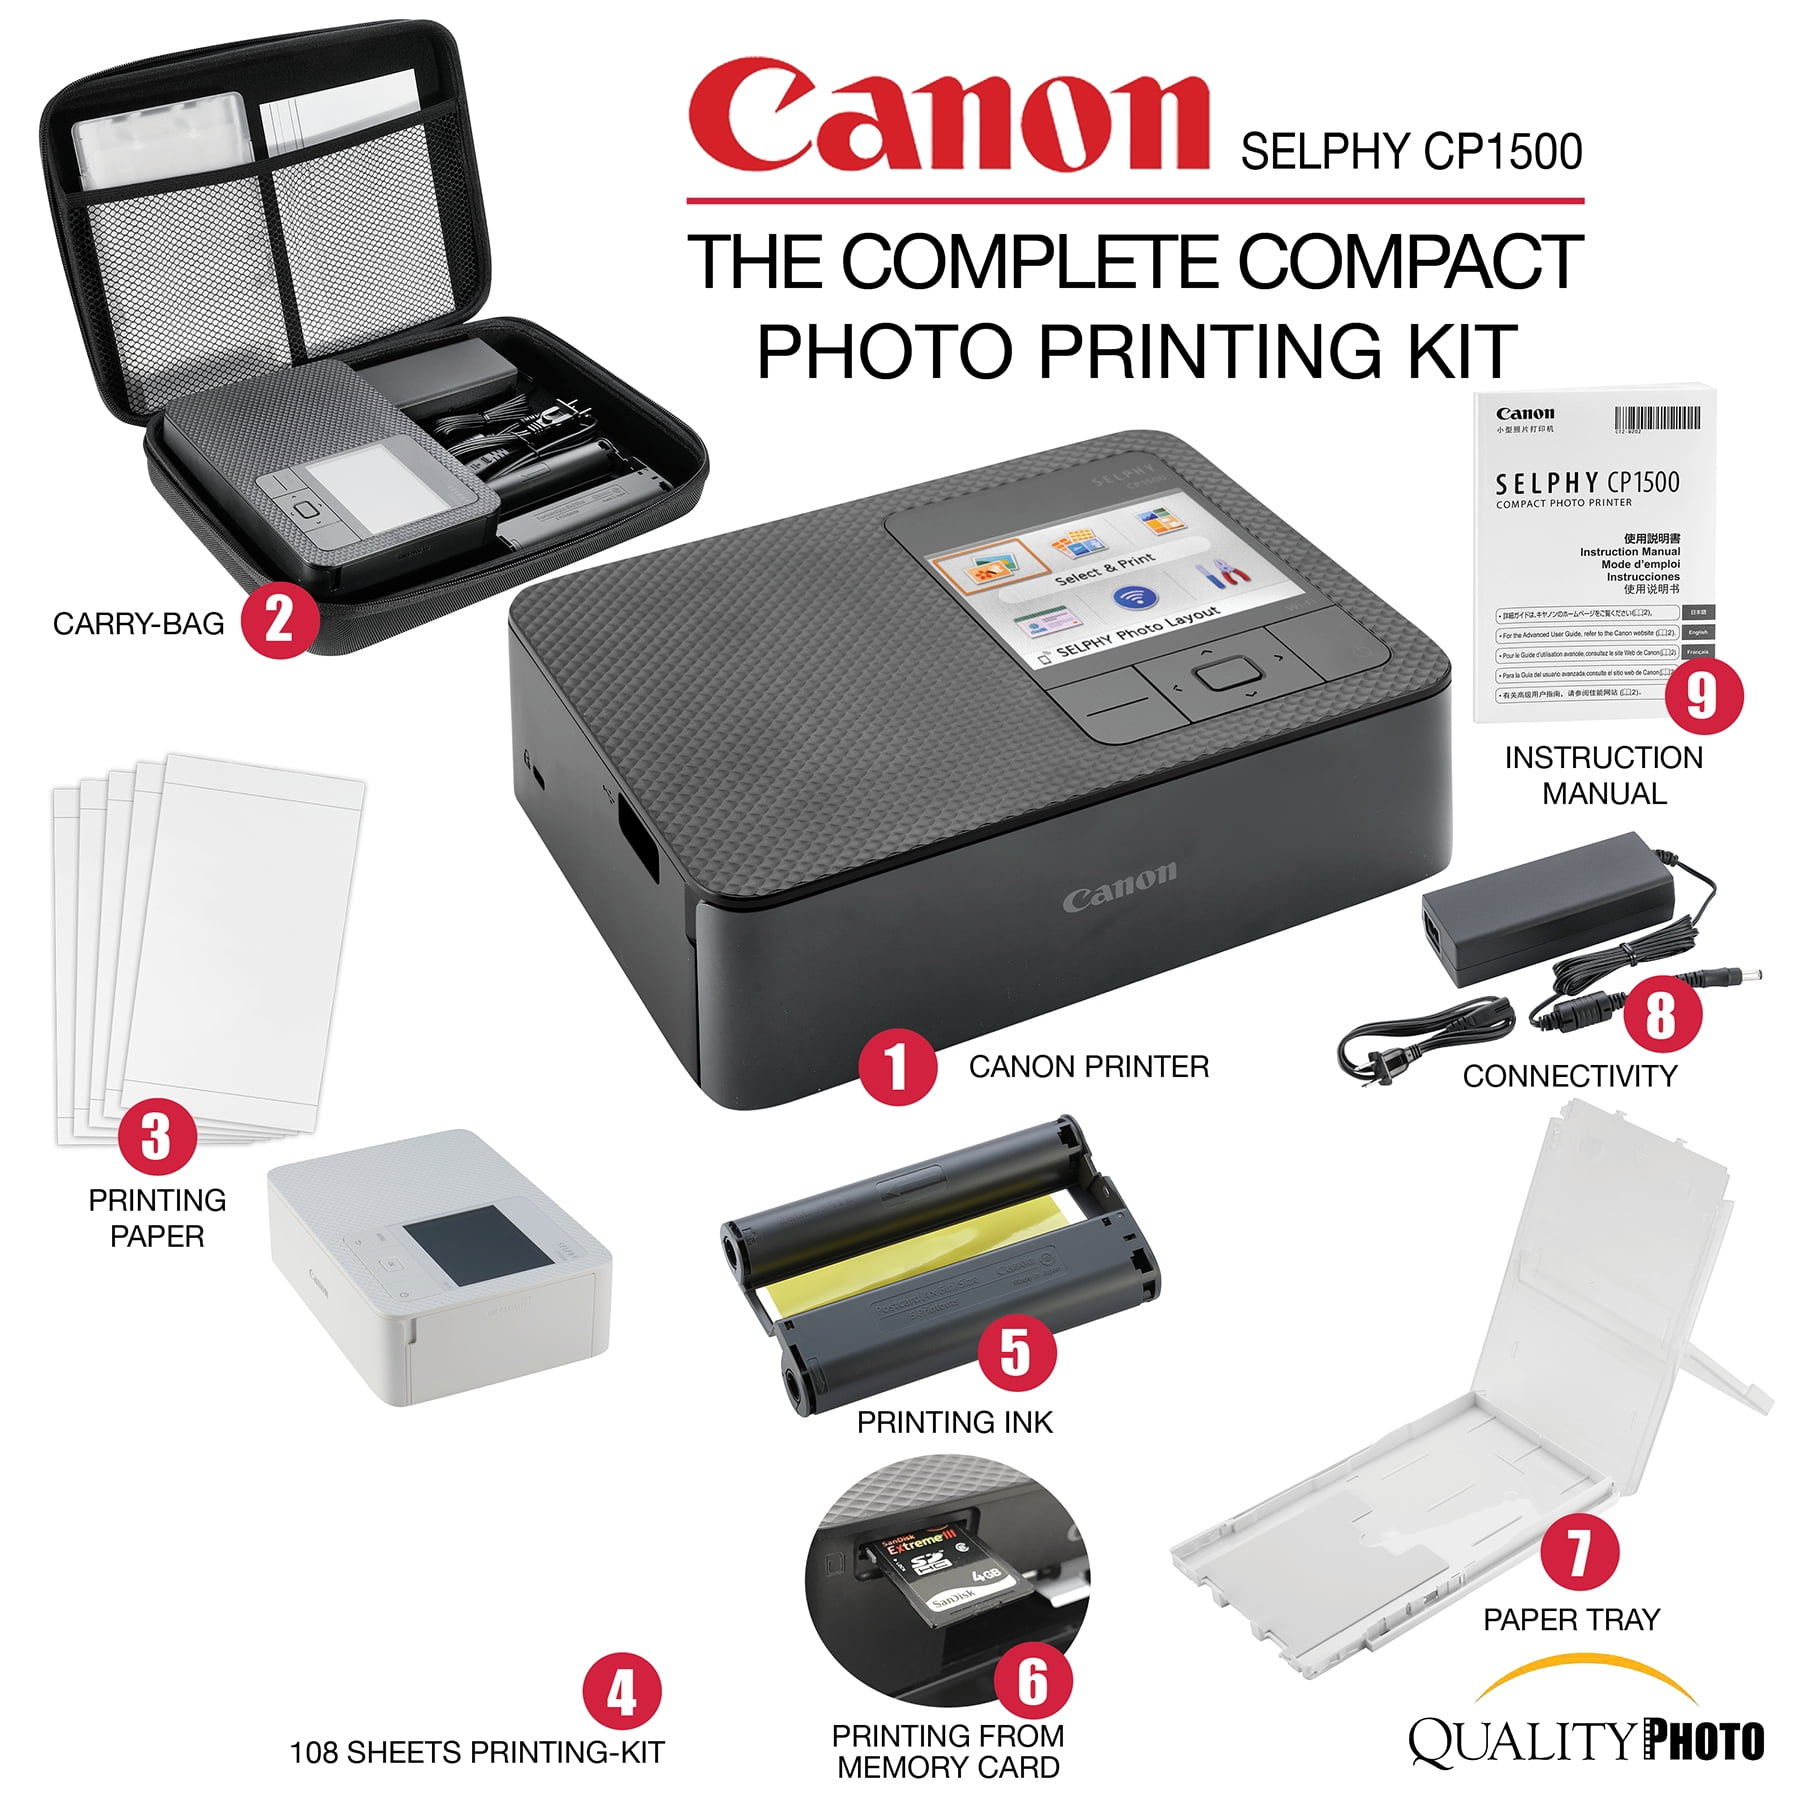 Canon 5539C001 SELPHY CP1500 Wireless Compact Photo Printer, Black Bundle  with Canon SELPHY Color Ink/Label XS-20L Set (20 Sheets + 1 Ink Cassette)